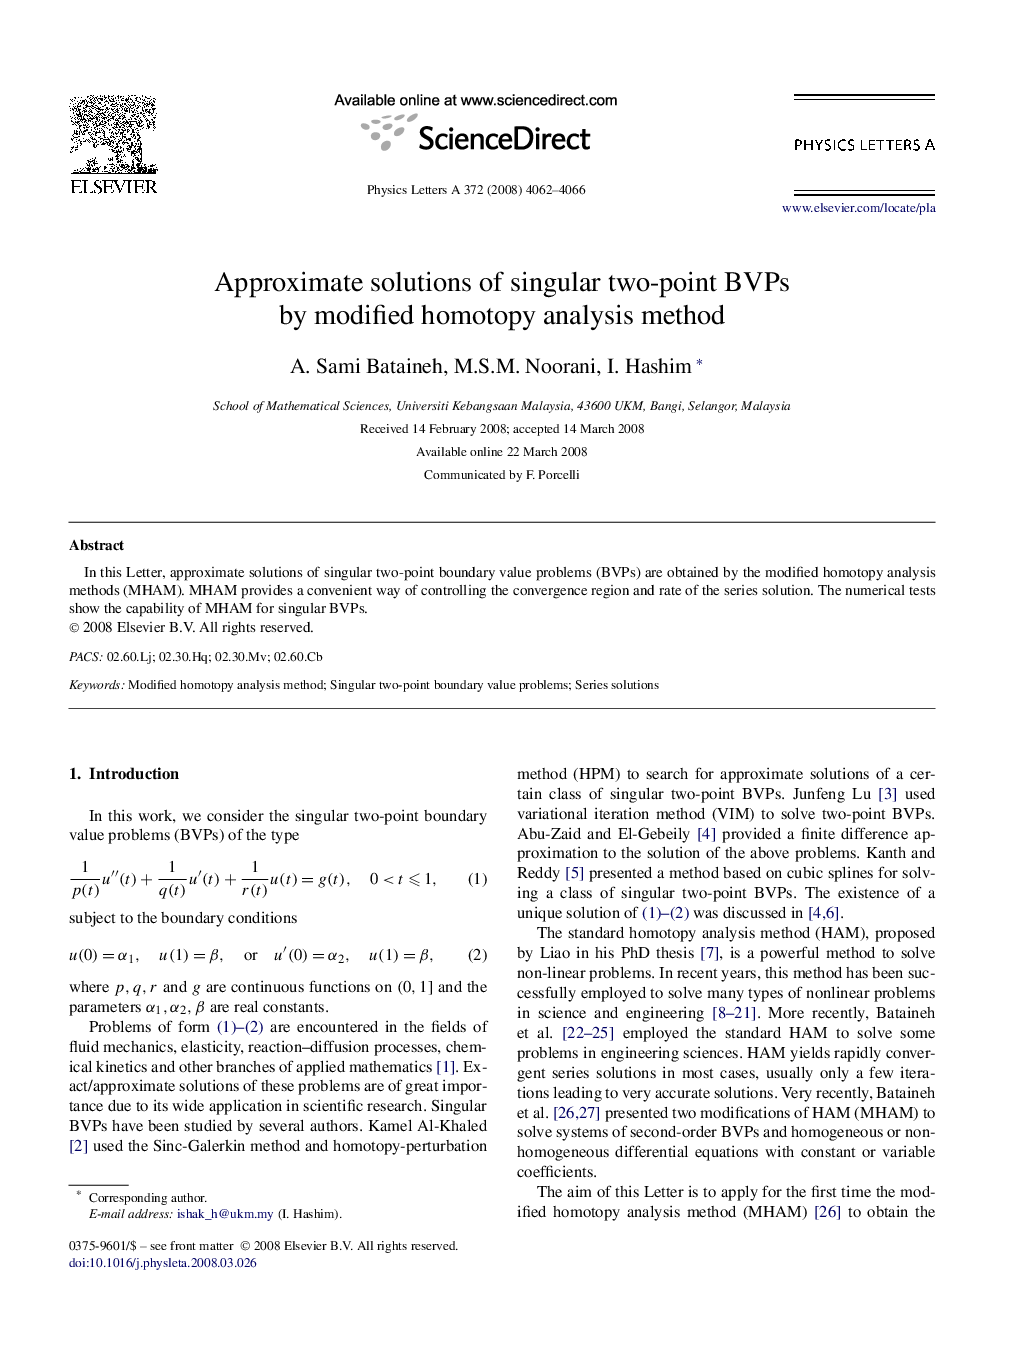 Approximate solutions of singular two-point BVPs by modified homotopy analysis method